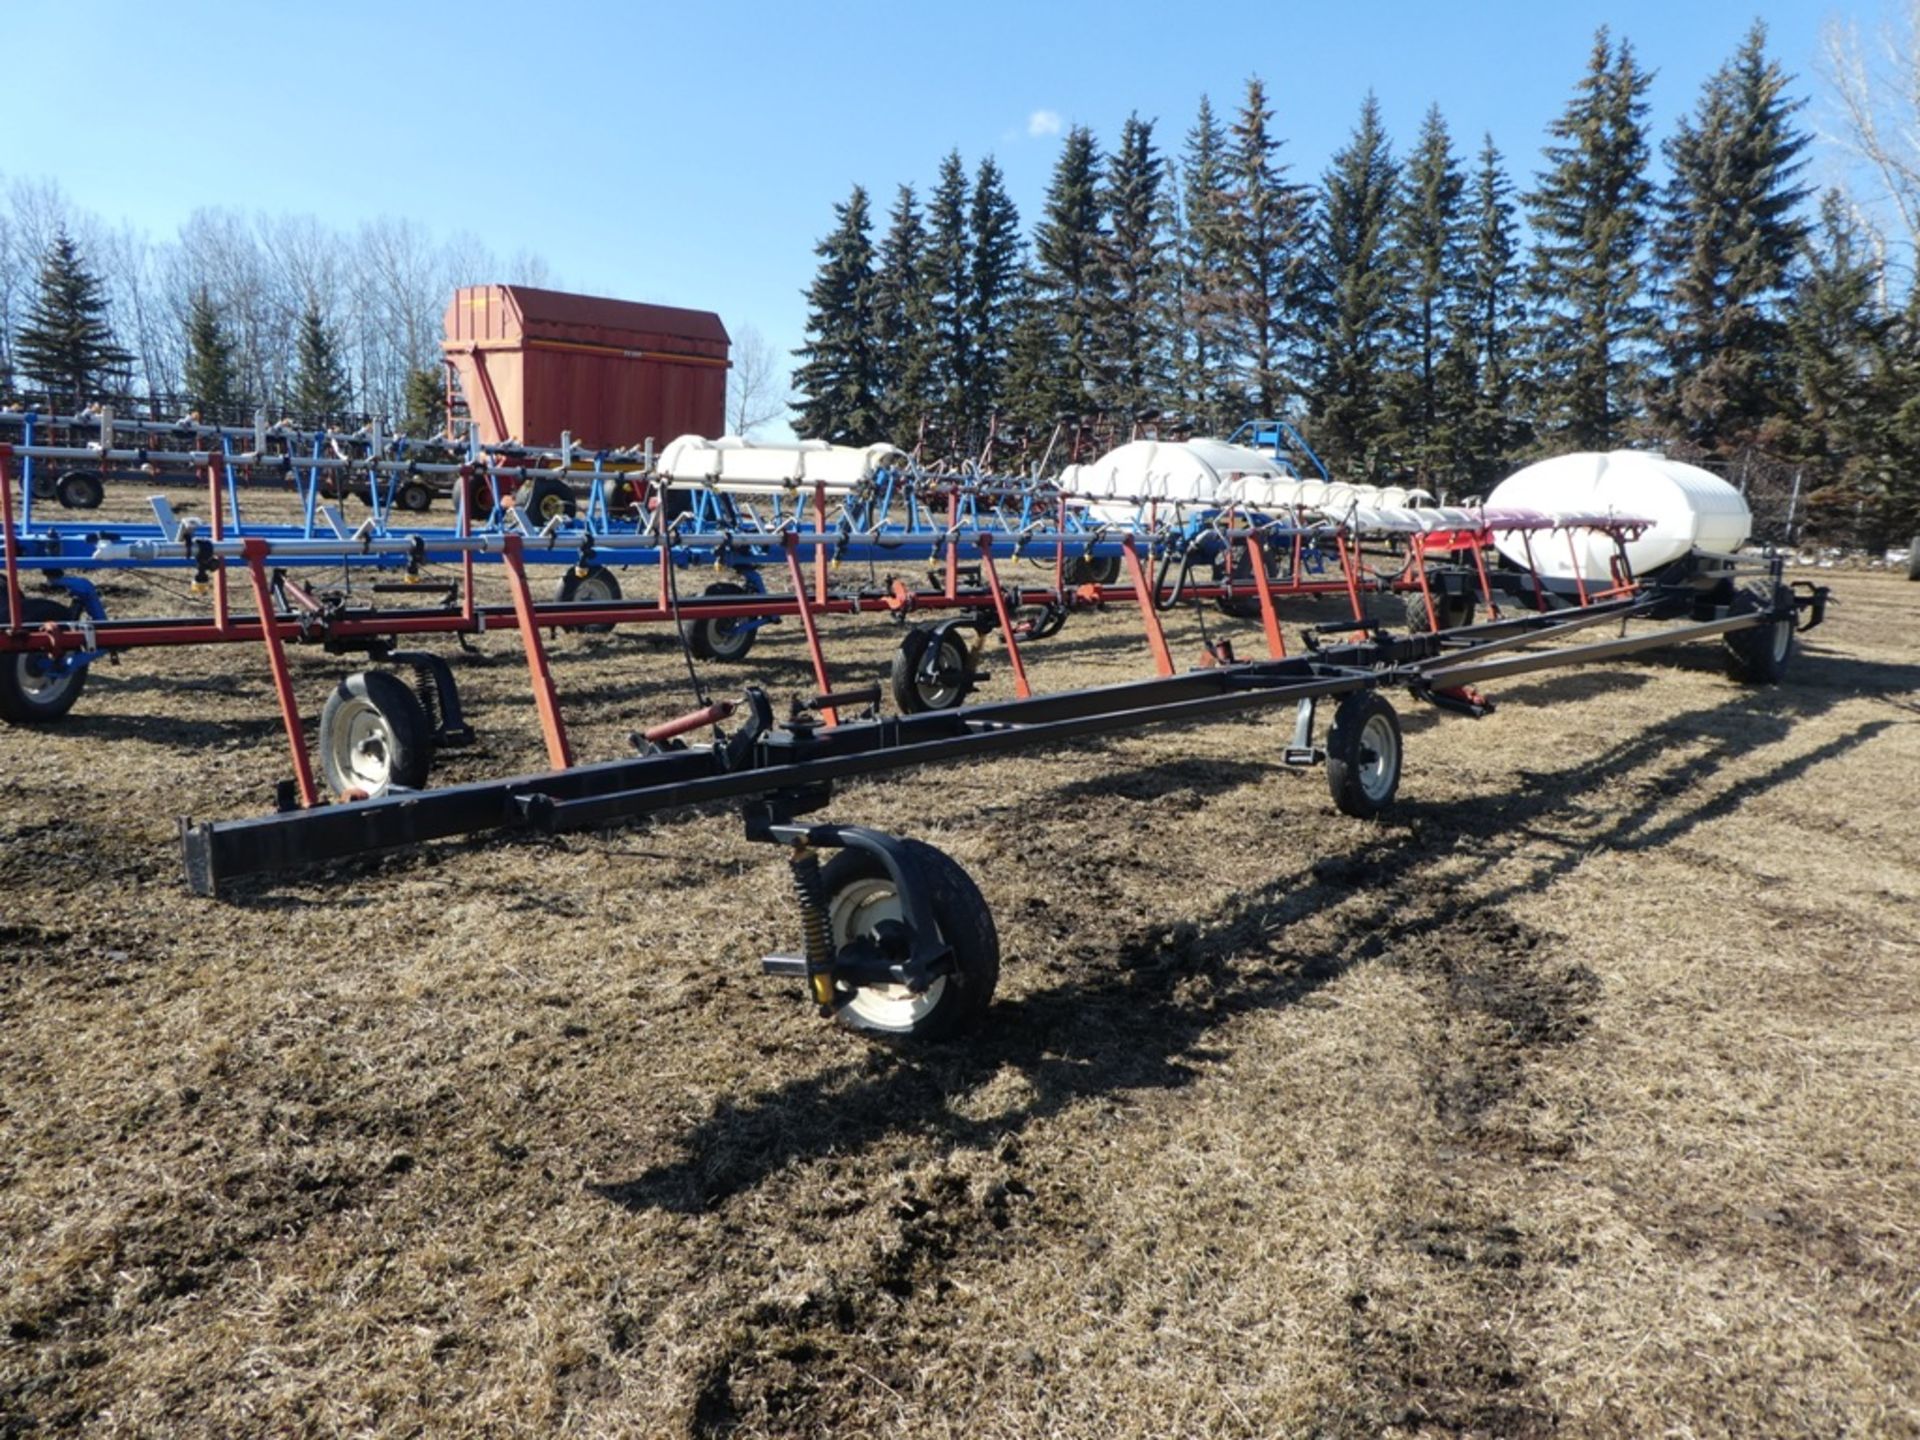 BOURGAULT 850 CENTURION 111 FIELD SPRAYER - 85' W/1000GAL POLY TANK, CHEMICAL MIX TANK, WIND SCREENS - Image 3 of 3